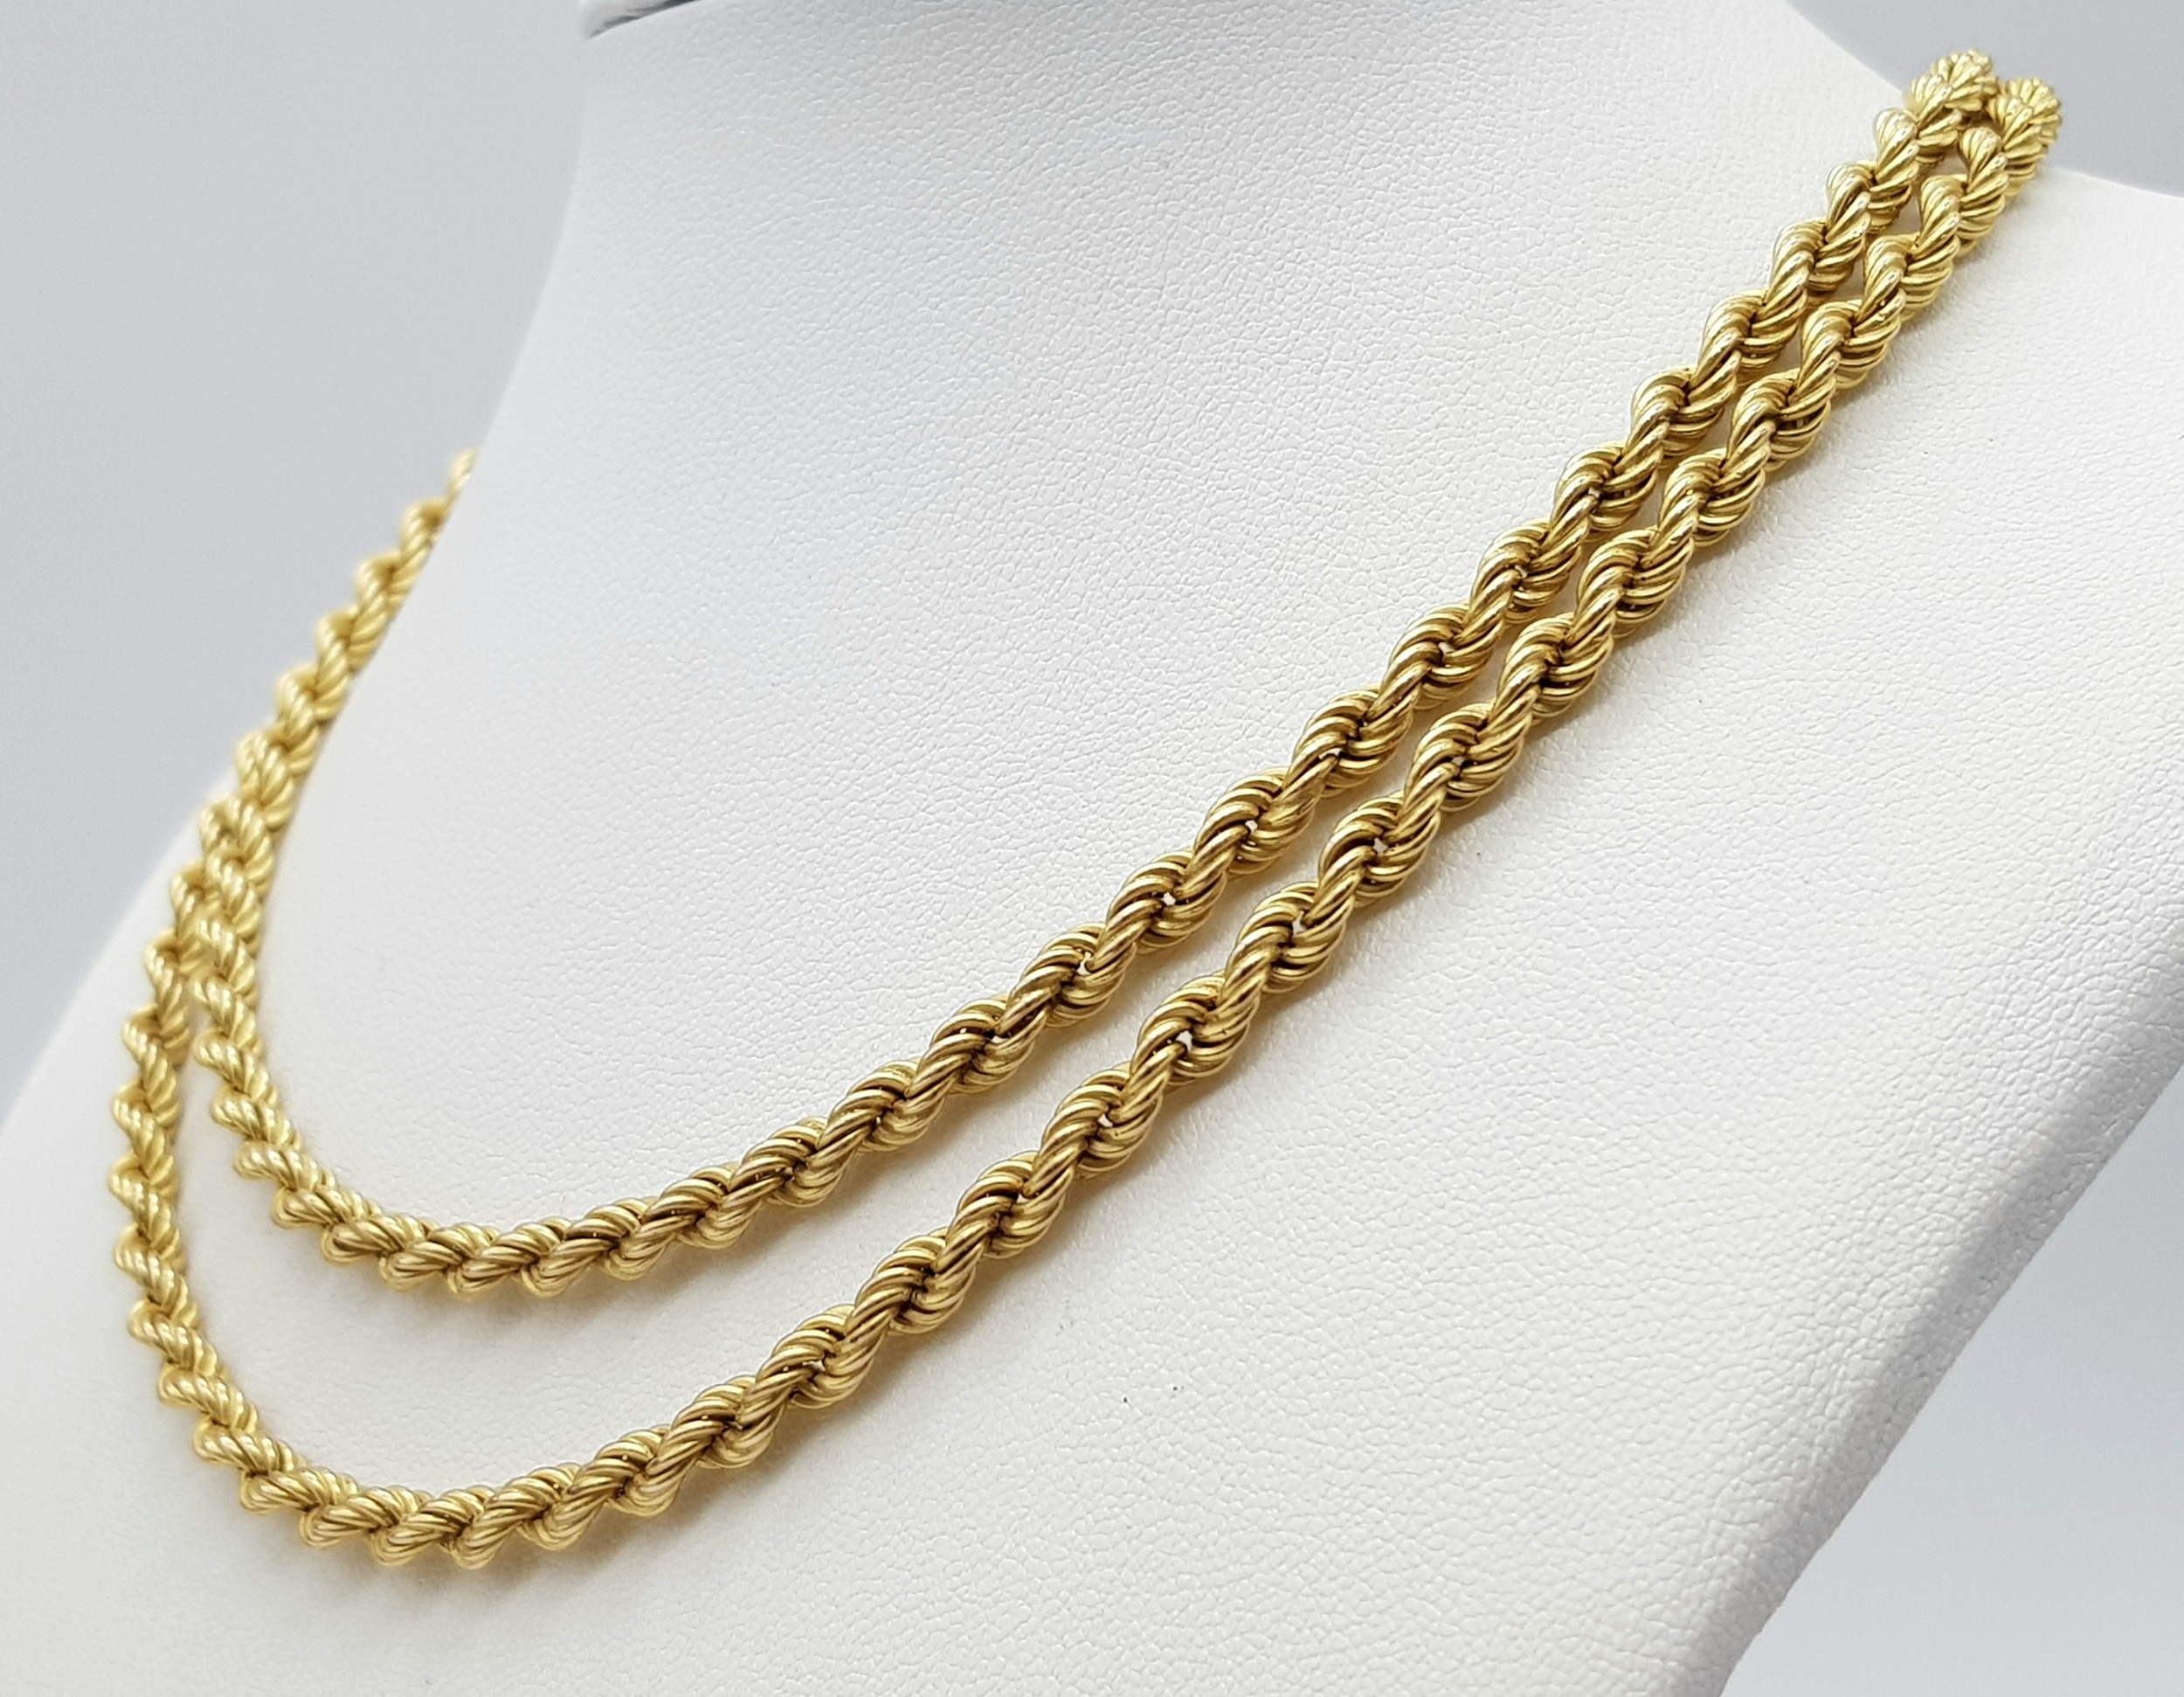 A 9K Yellow Gold Rope Necklace. 74cm. 14.3g weight. - Image 2 of 5